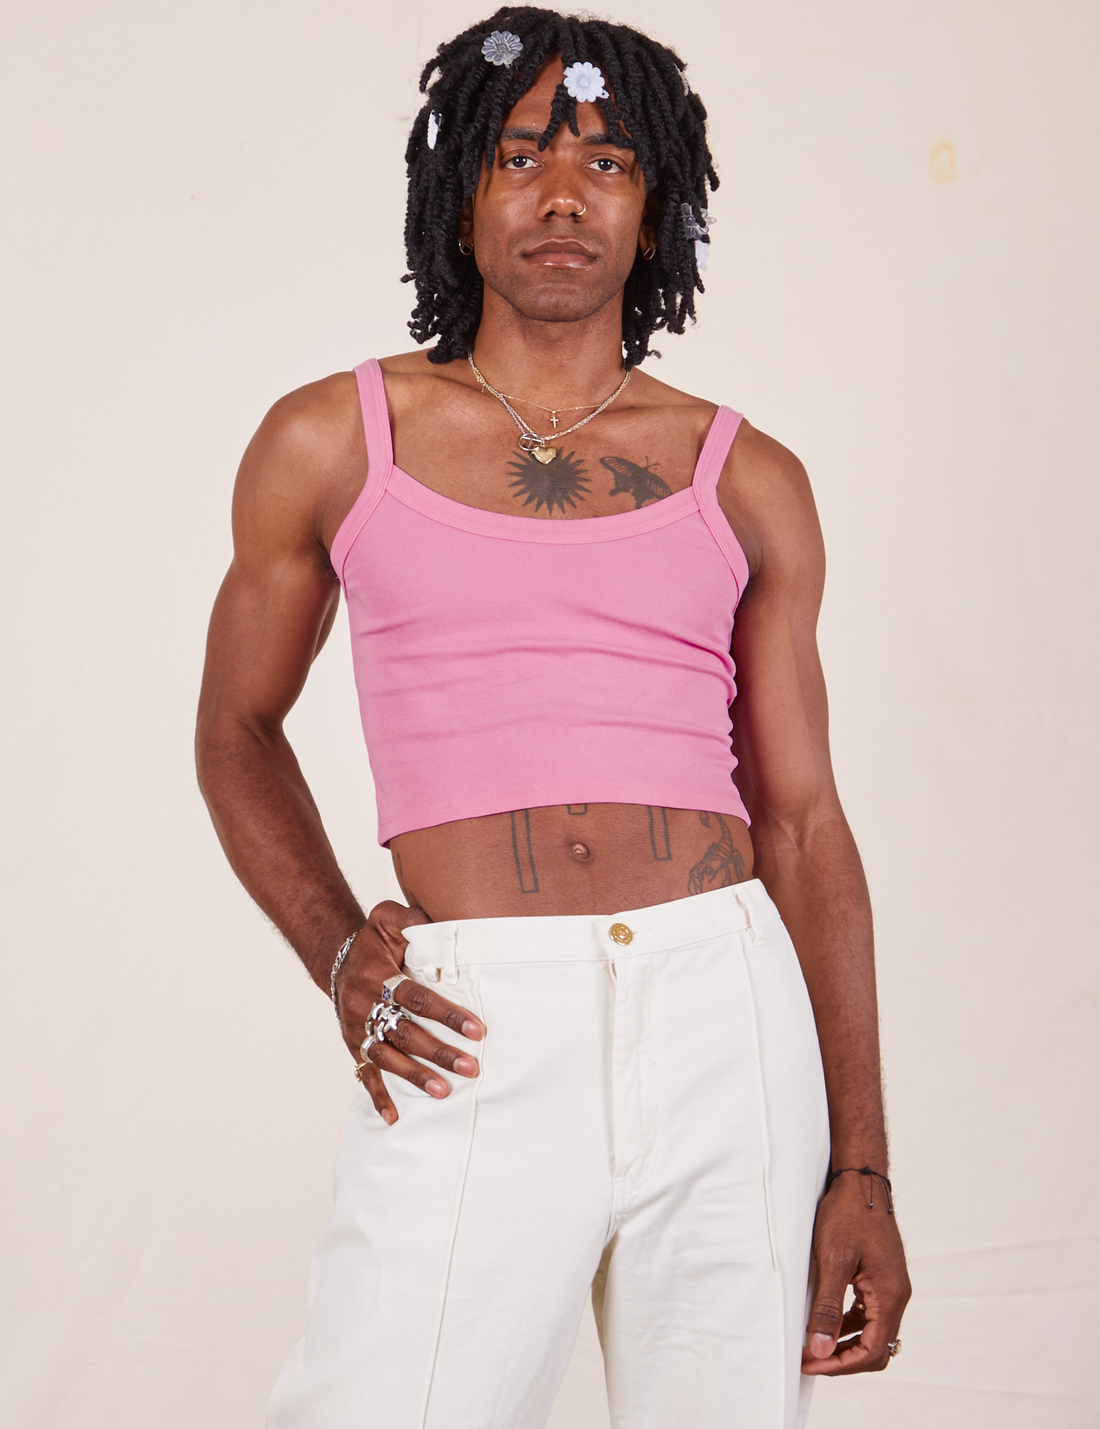 Jerrod is 6'3" and wearing S Cropped Cami in Bubblegum Pink paired with vintage off-white Western Pants